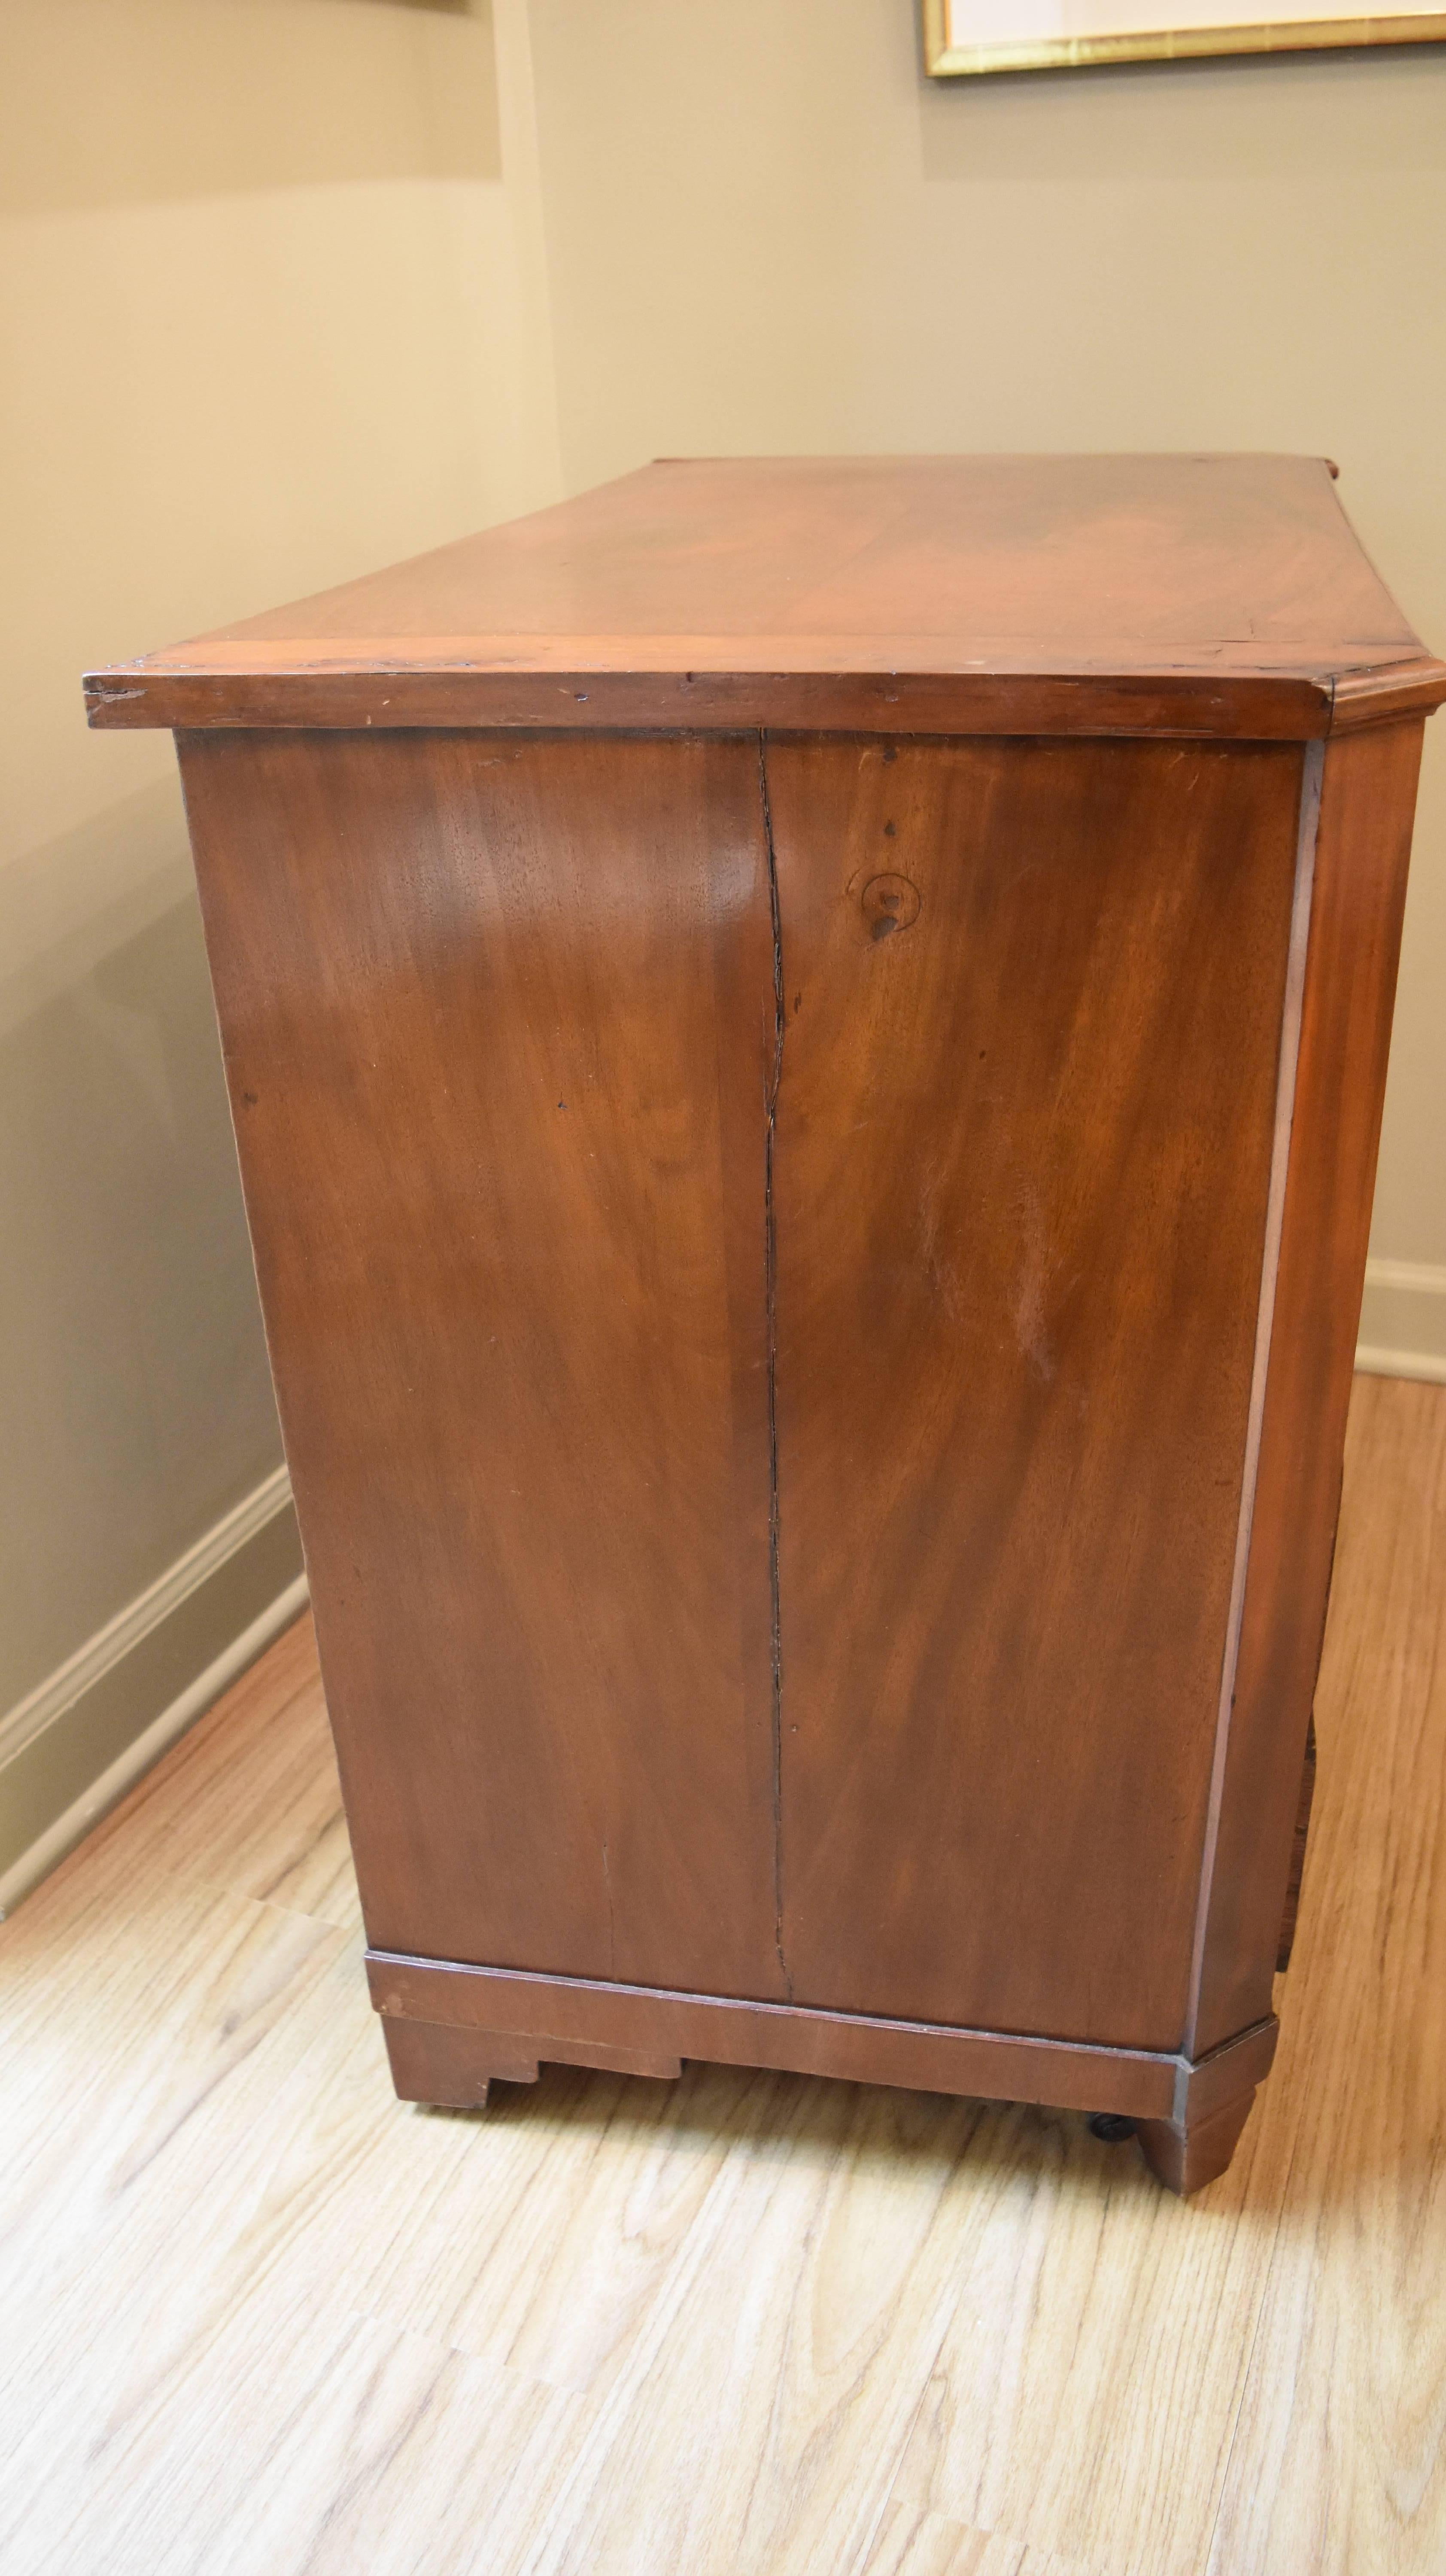 This early 19th century mahogany chest is from Belgium and has four working drawers. The oval pulls and key escutcheons are brass and the front legs have hidden casters. The small size makes it perfect for a bedside table or hallway chest.